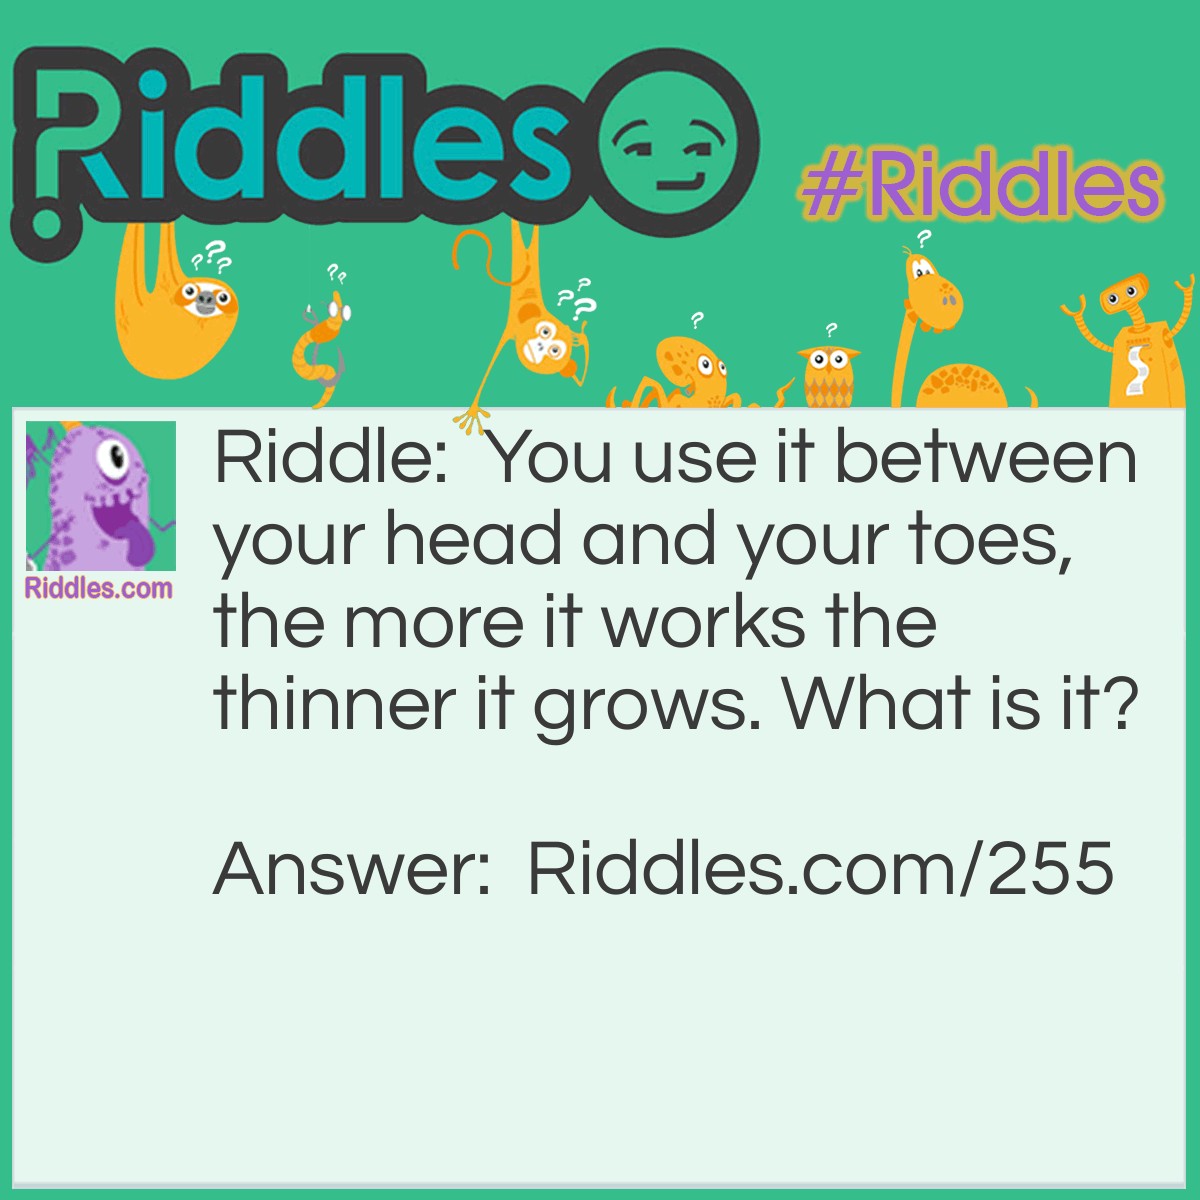 Riddle: You use it between your head and your toes, the more it works the thinner it grows. What is it? Answer: A Bar of Soap.